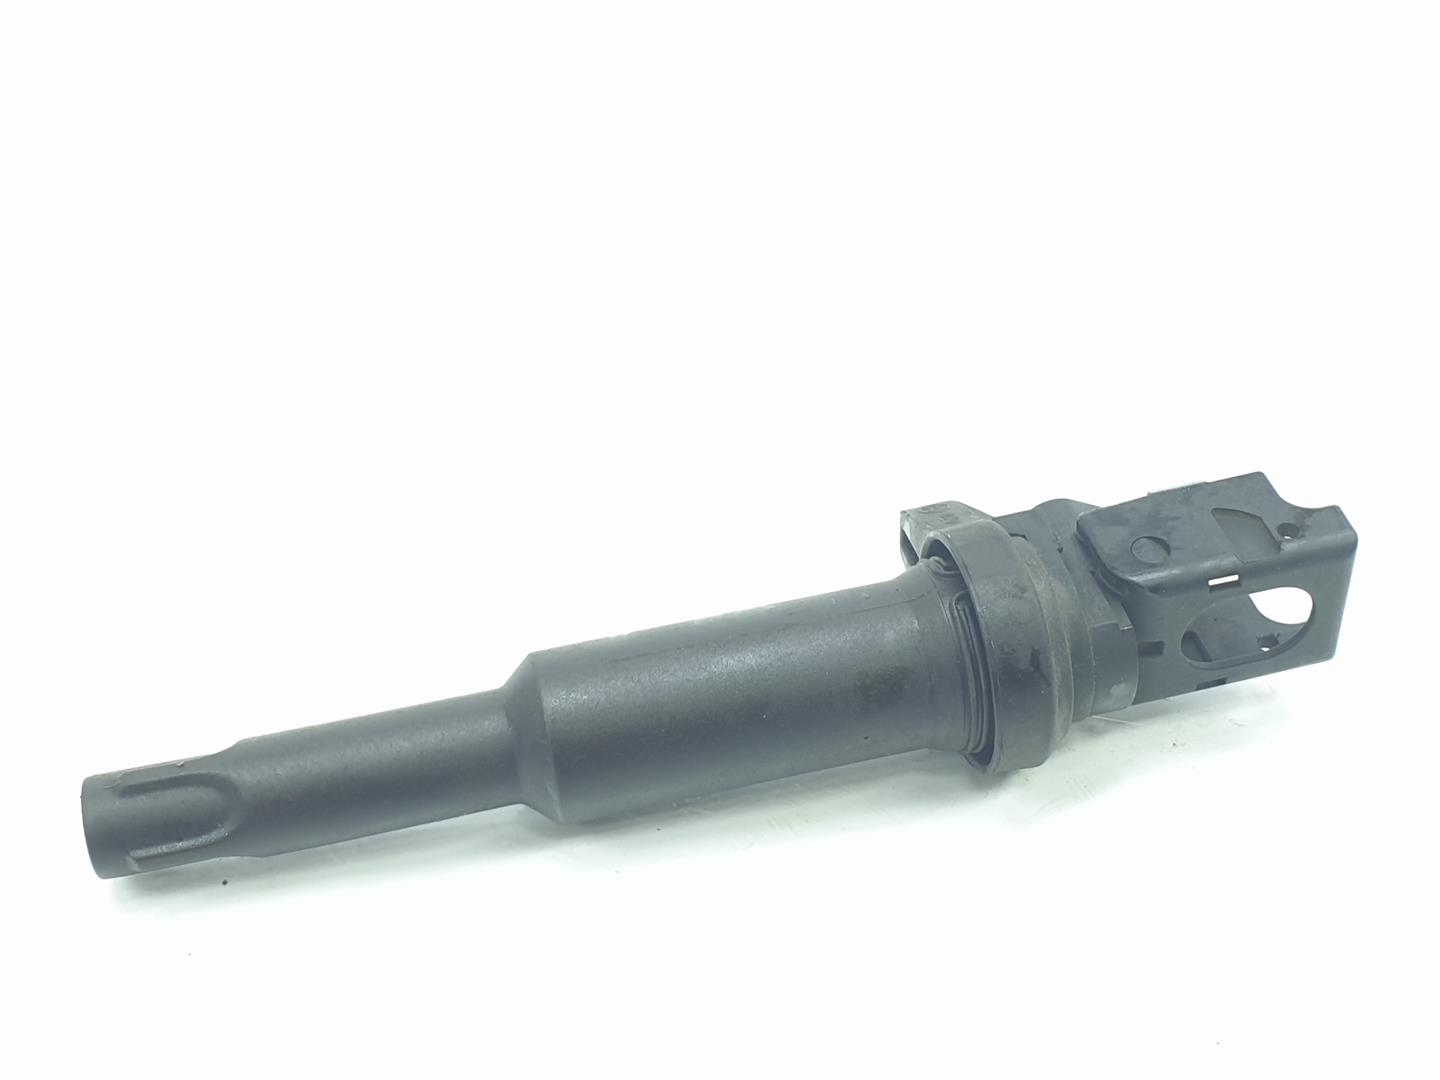 BMW 6 Series E63/E64 (2003-2010) High Voltage Ignition Coil 7548553, 7548553, 1111AA 24700098